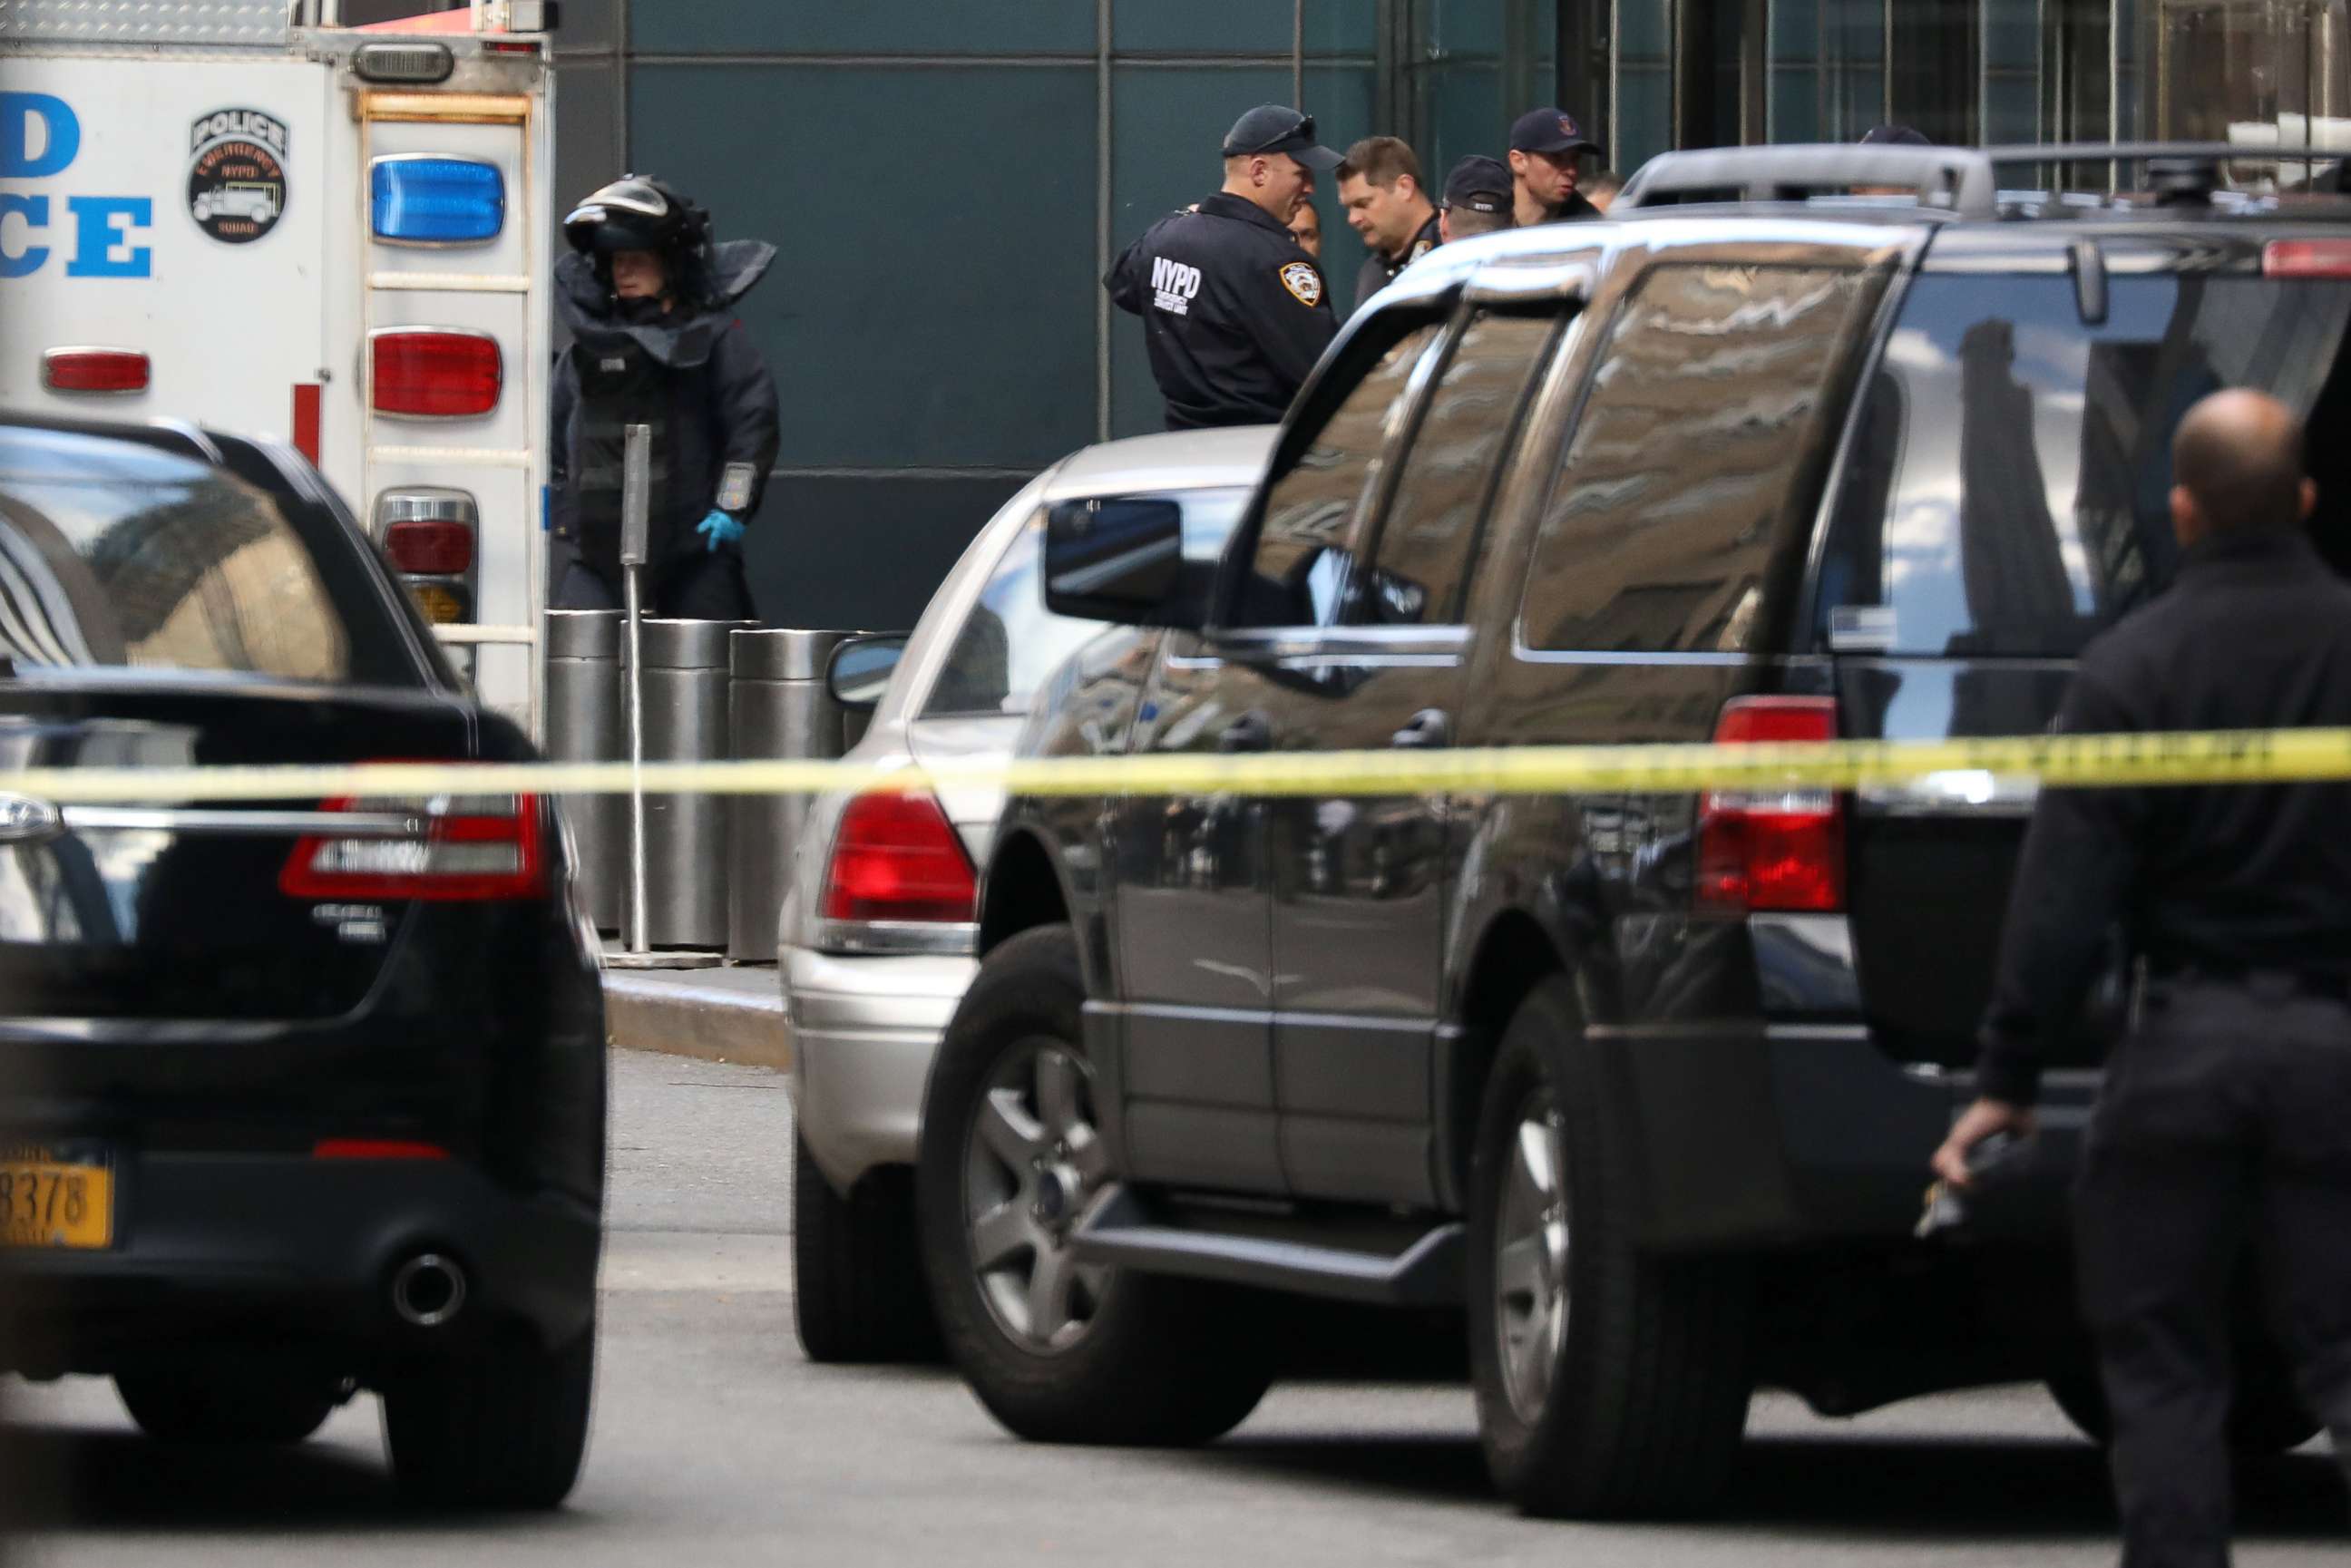 PHOTO: A member of the New York Police Department bomb squad is pictured outside the Time Warner Center in New York City after a suspicious package was found inside the CNN Headquarters.